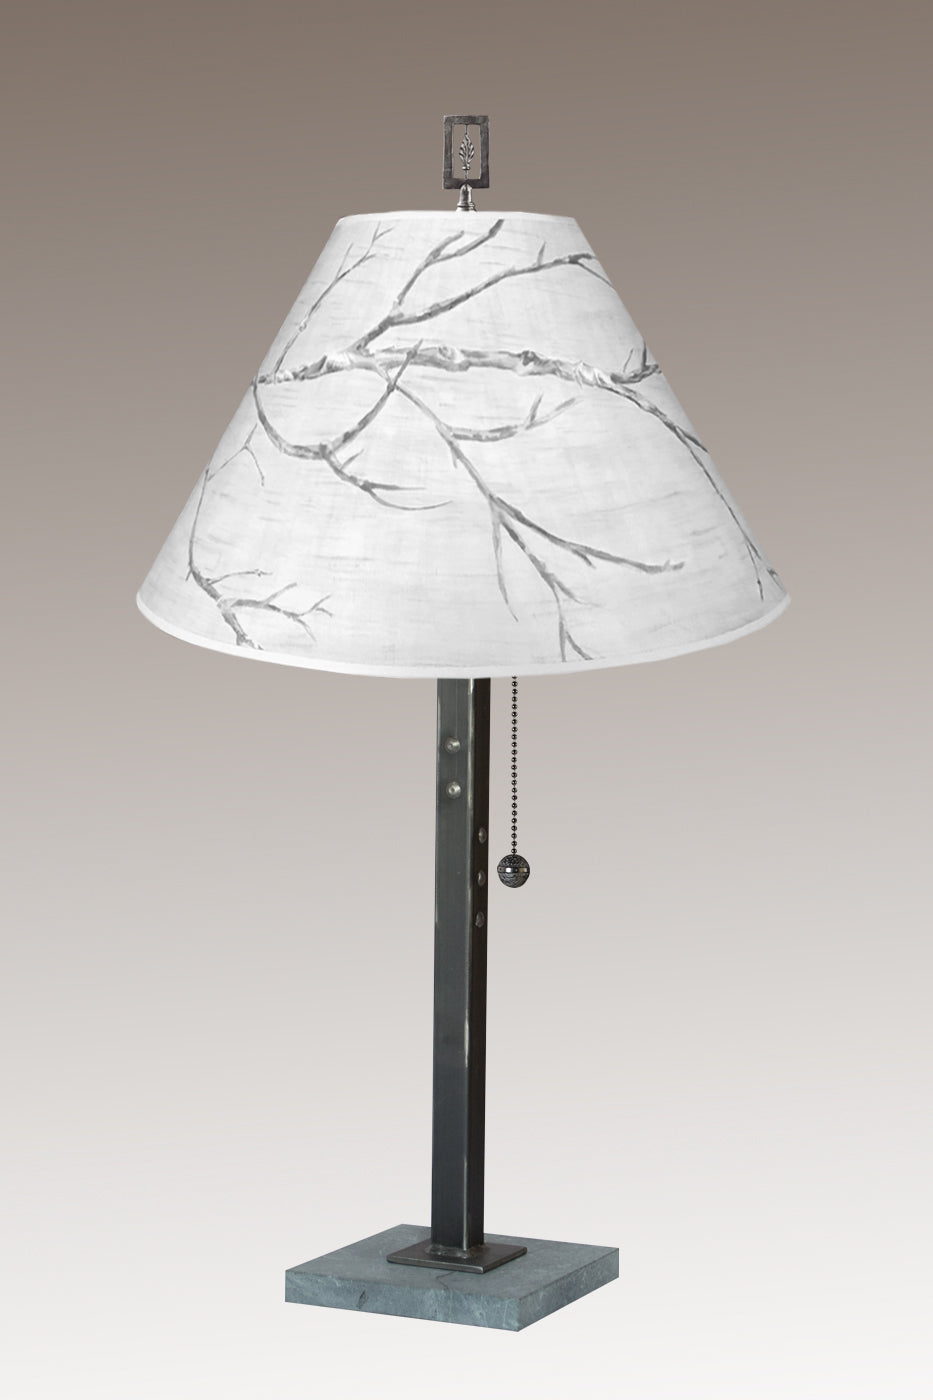 Janna Ugone & Co Table Lamps Steel Table Lamp with Medium Conical Shade in Sweeping Branch